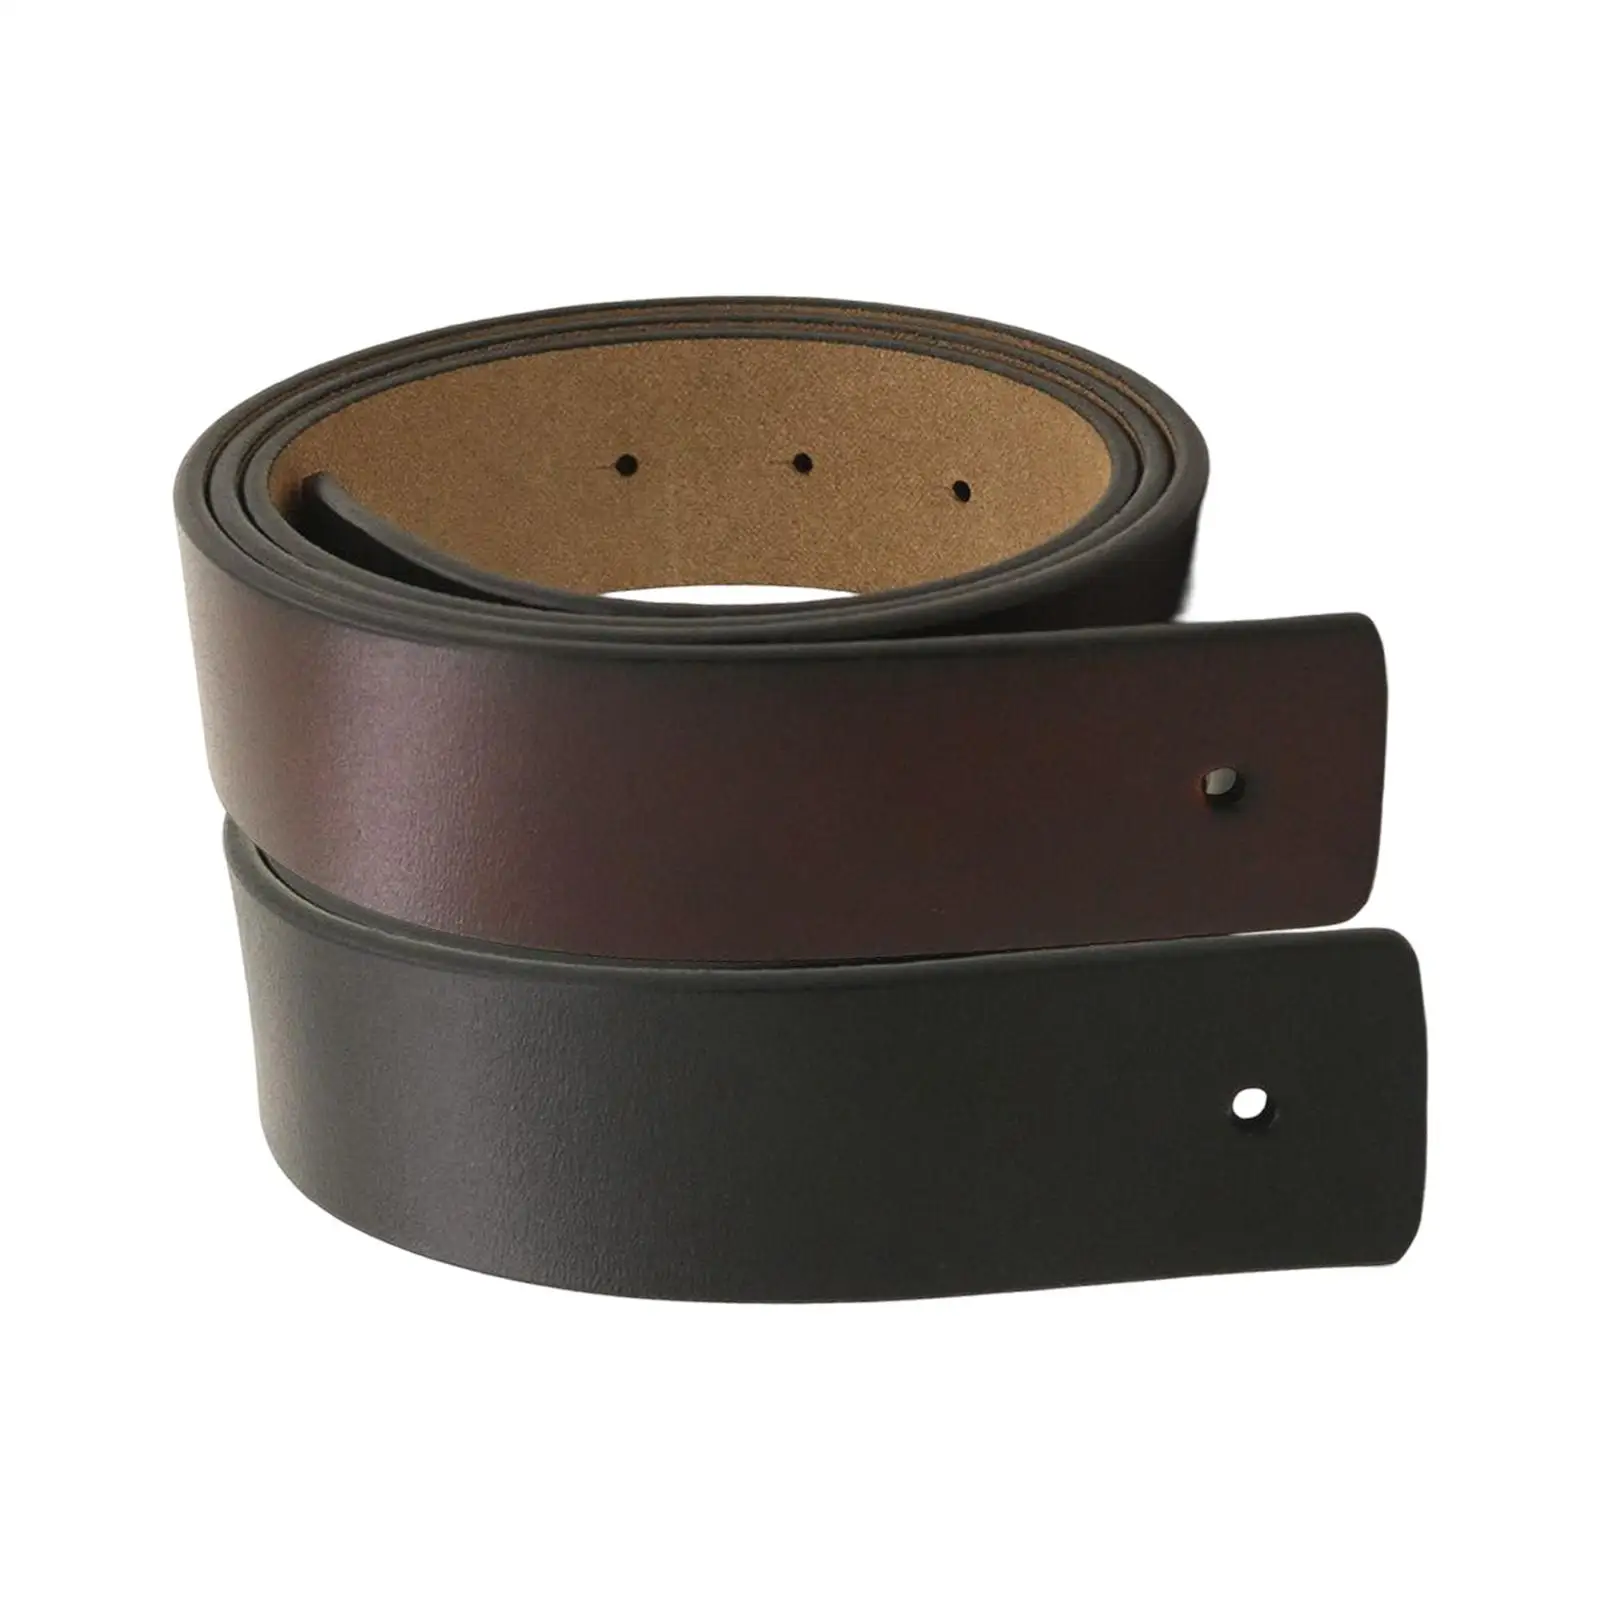 Retro PU Leather Men Belts Without Automatic Buckle Casual Dress Belts Decorative Male Waist Belt for Shorts Party Supplies